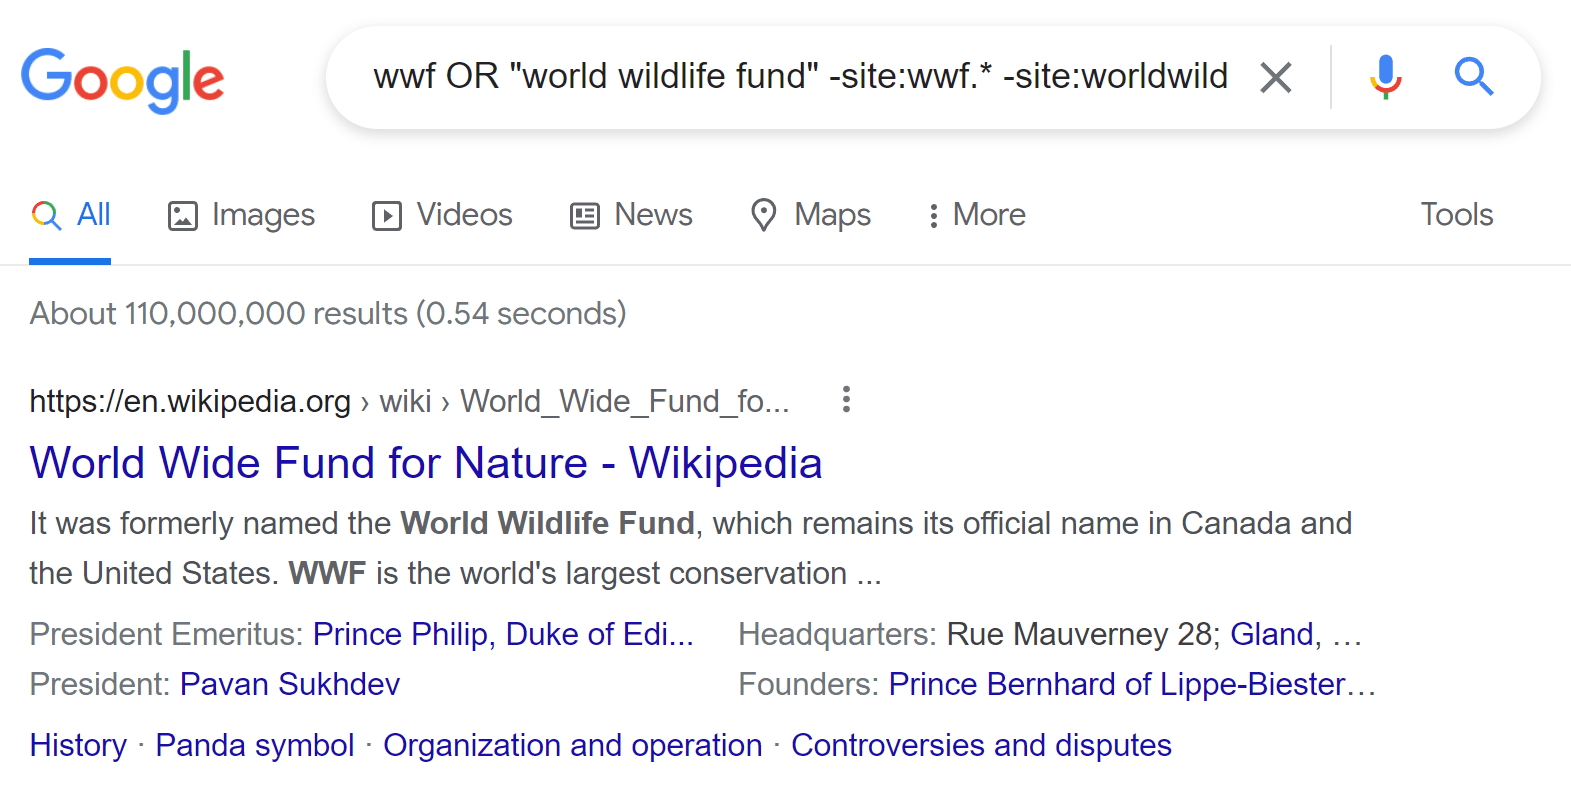 Google SERP for "wwf" or "world wildlife fund" with search operators applied 